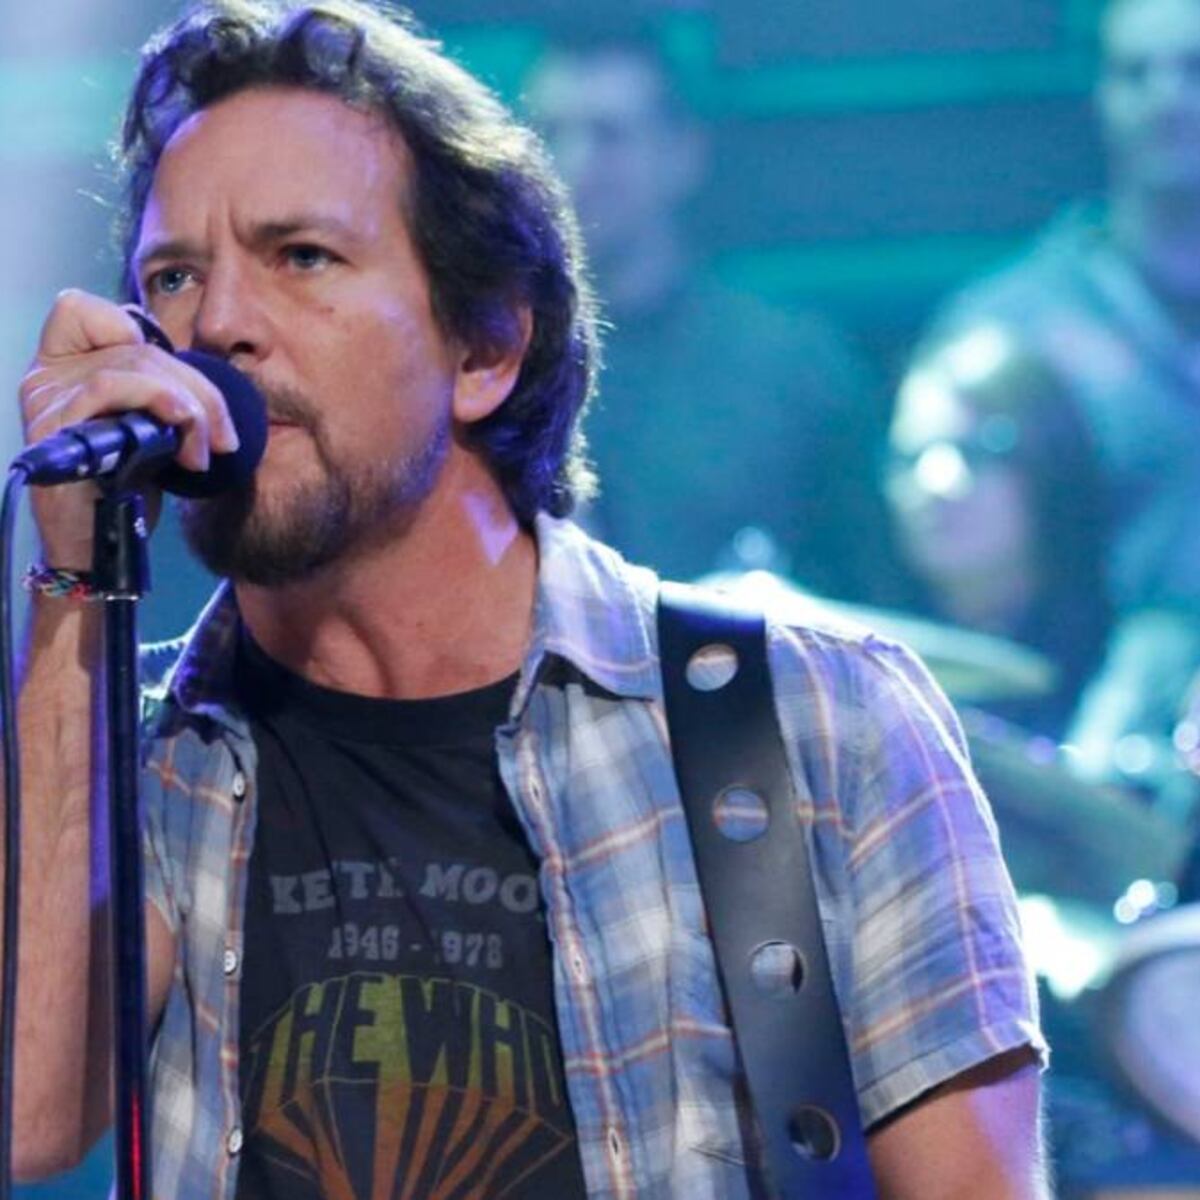 Where are we with the new Pearl Jam album? 